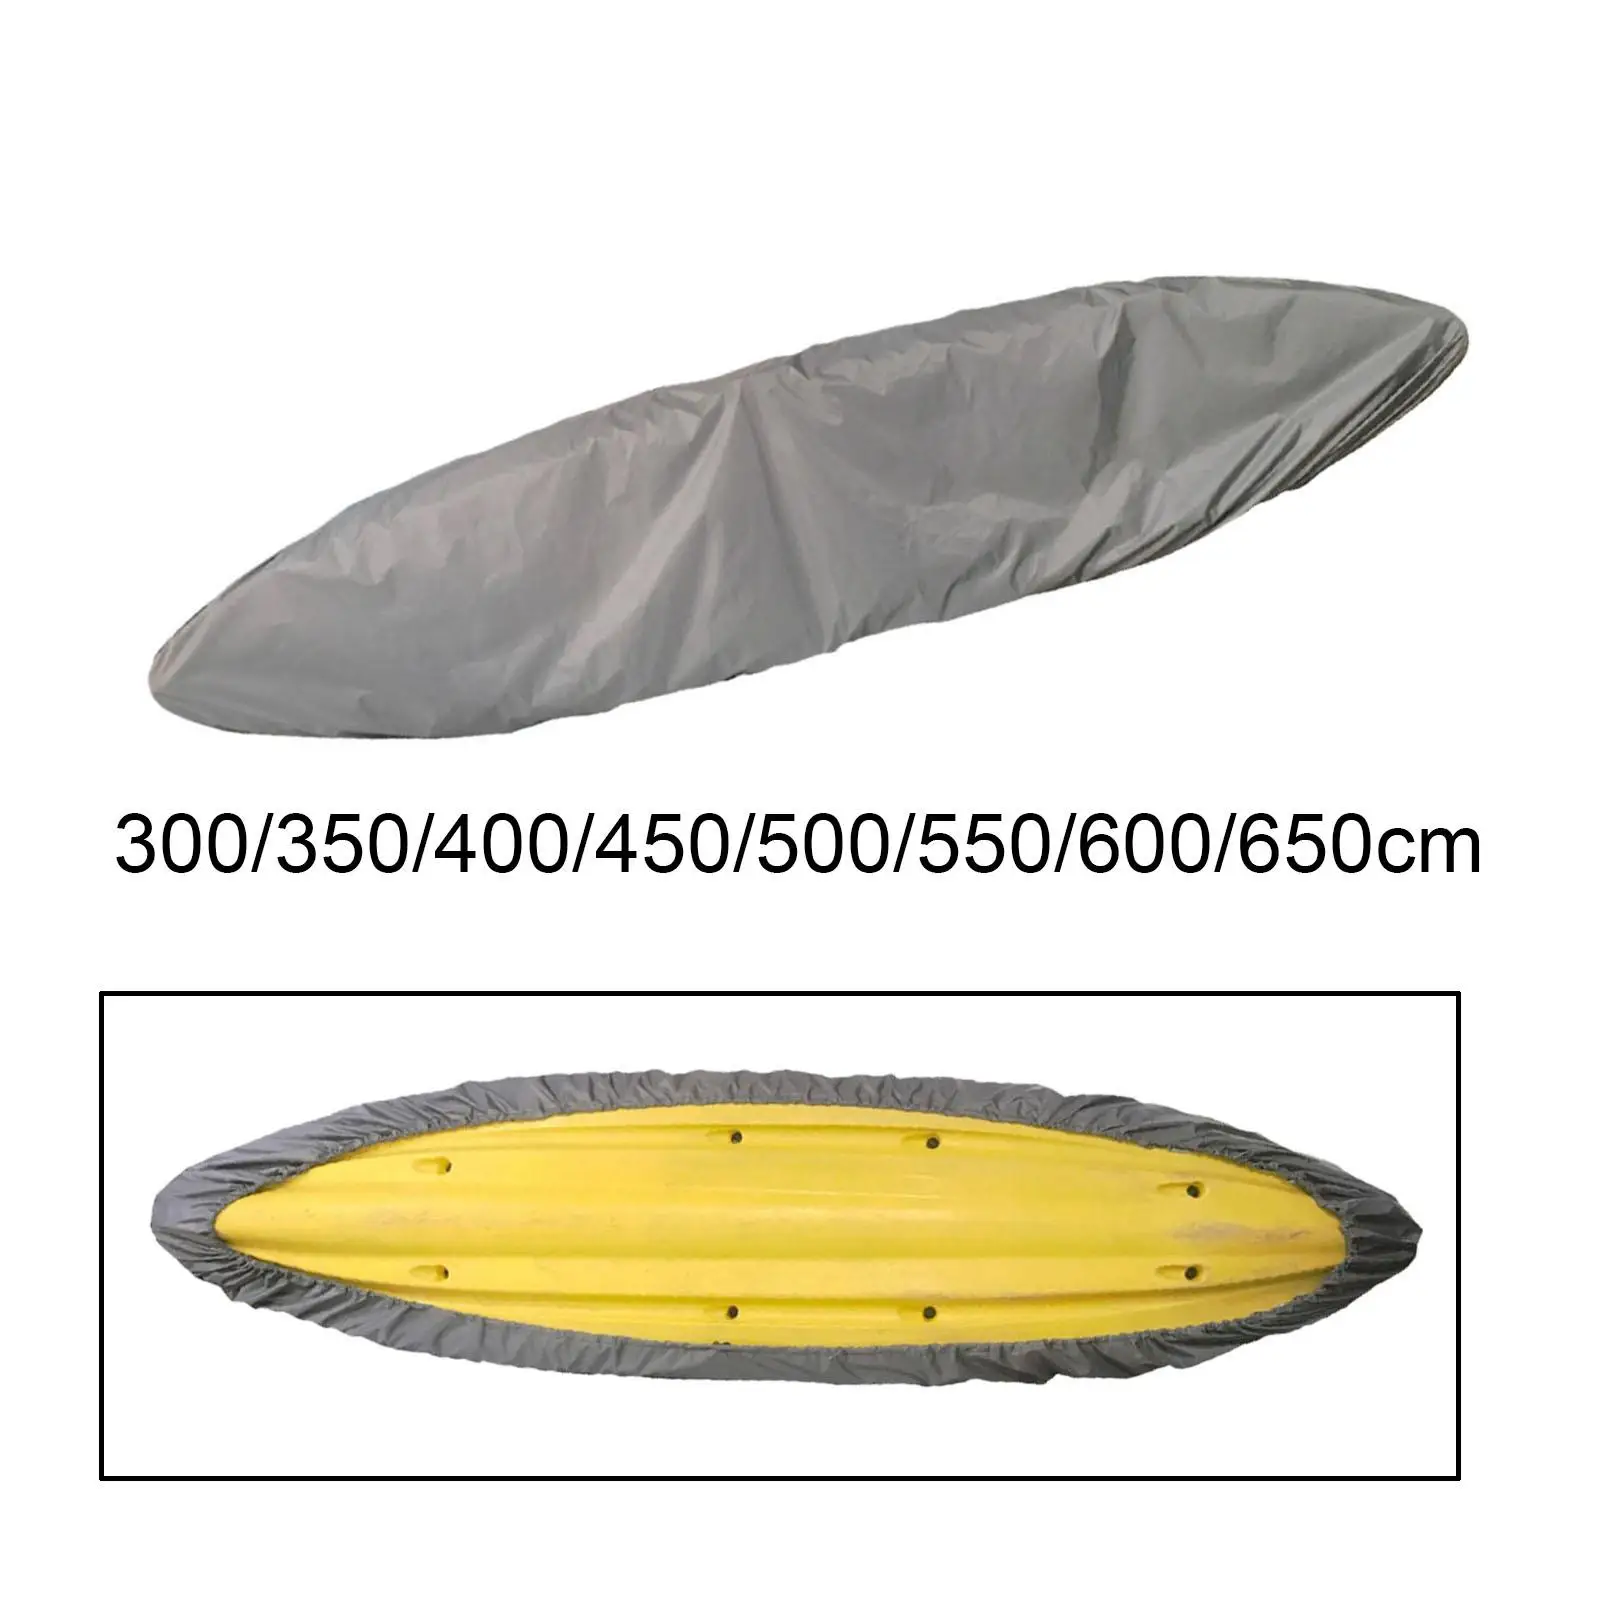 Kayak Cover Waterproof Canoe Cover Protector Oxford Cloth Boat Storage Cover